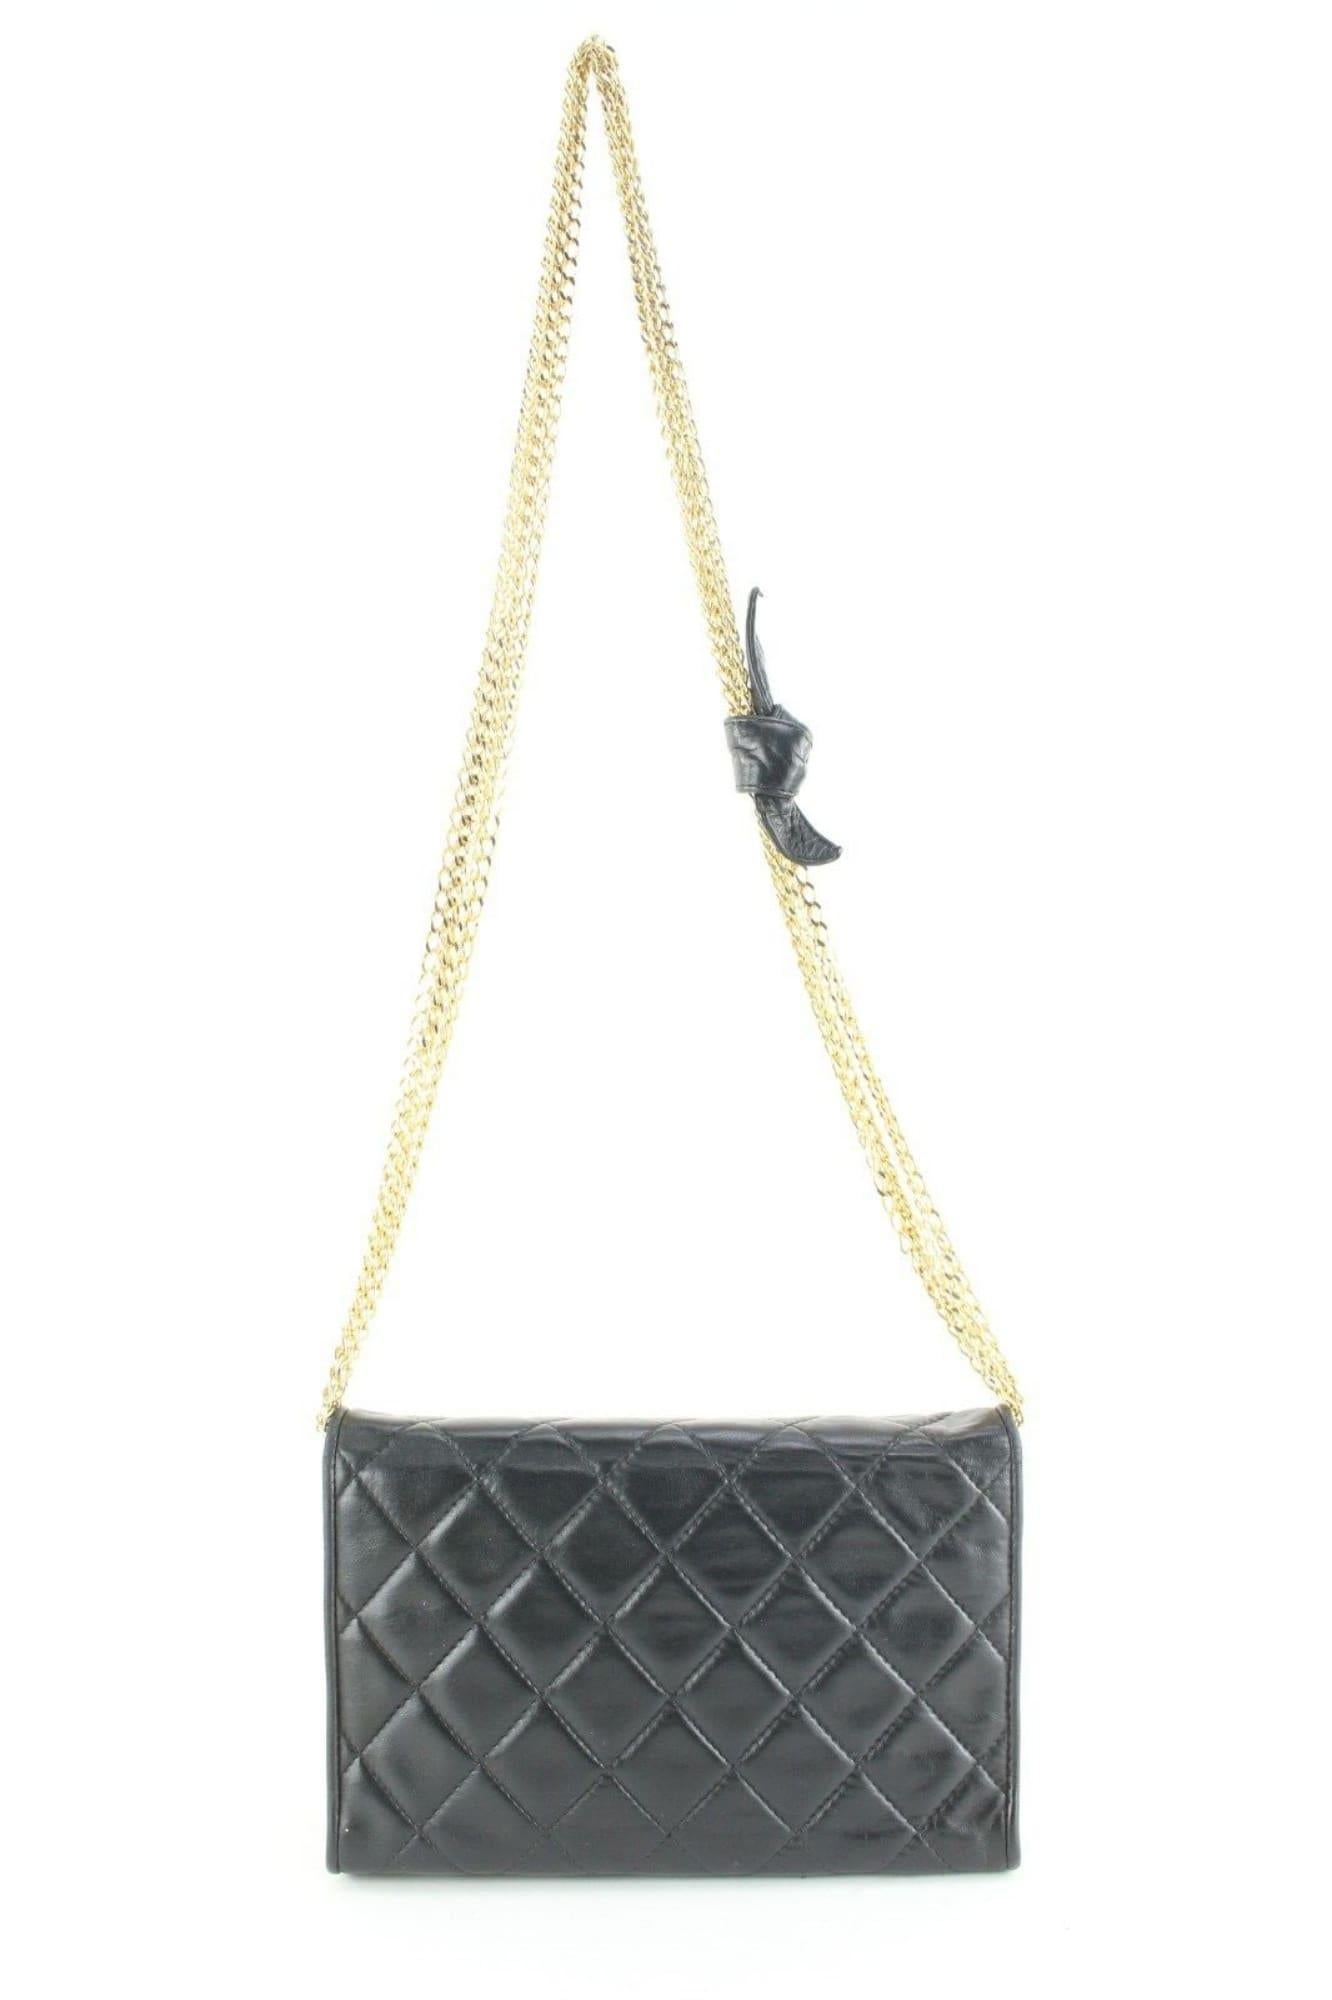 Chanel Black Quilted Lambskin Multi Chain GHW 3CK419C In Good Condition For Sale In Dix hills, NY